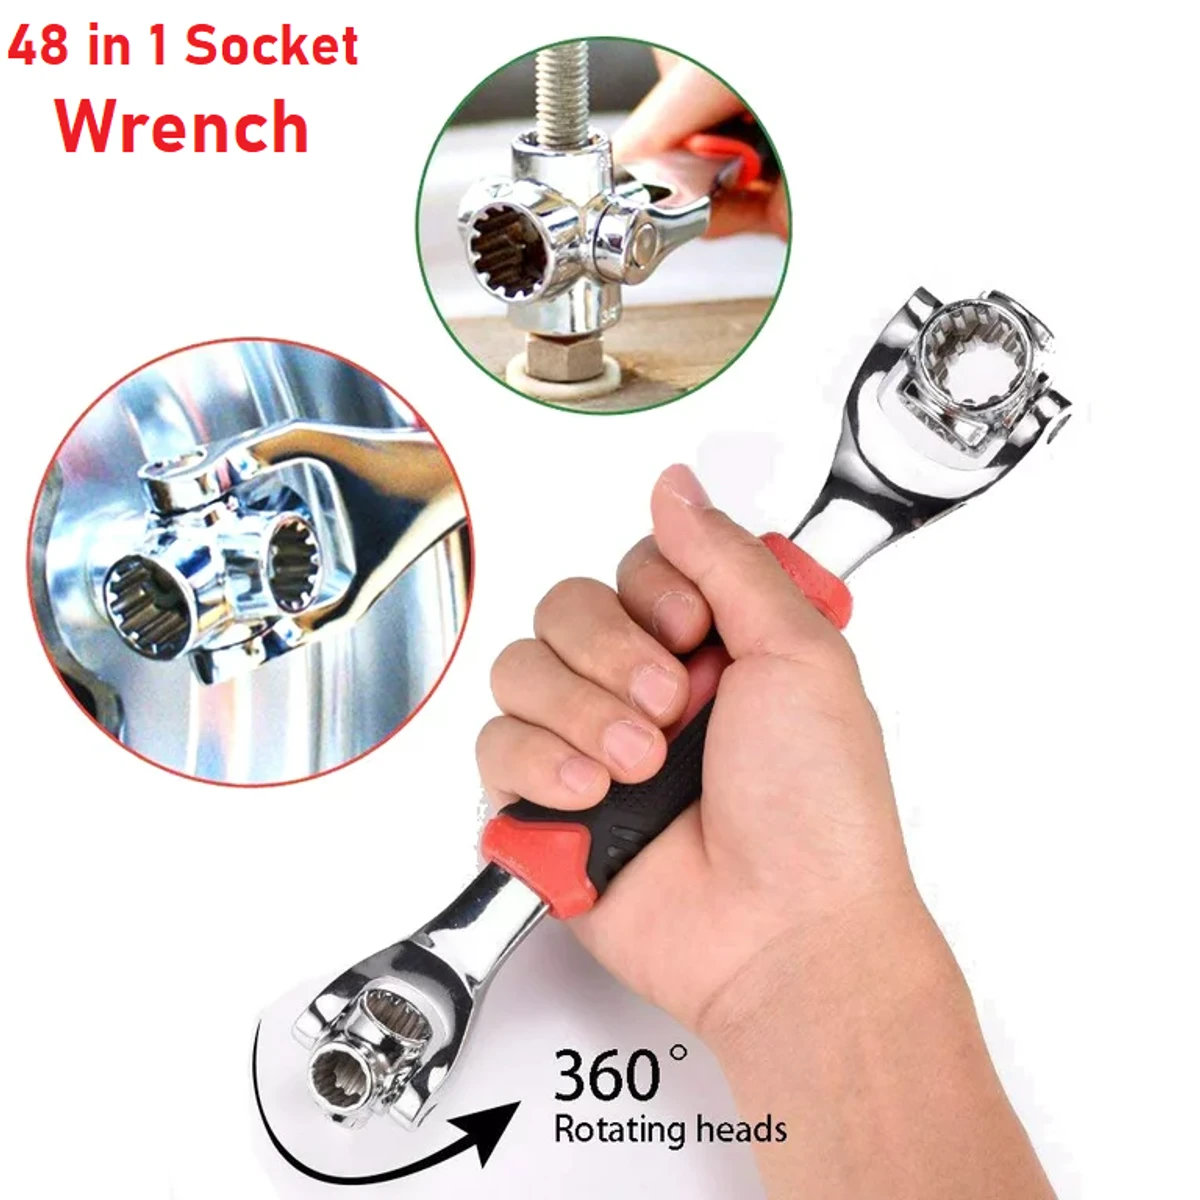 48-in-1 Universal 360 Degree 6-Point Socket Wrench